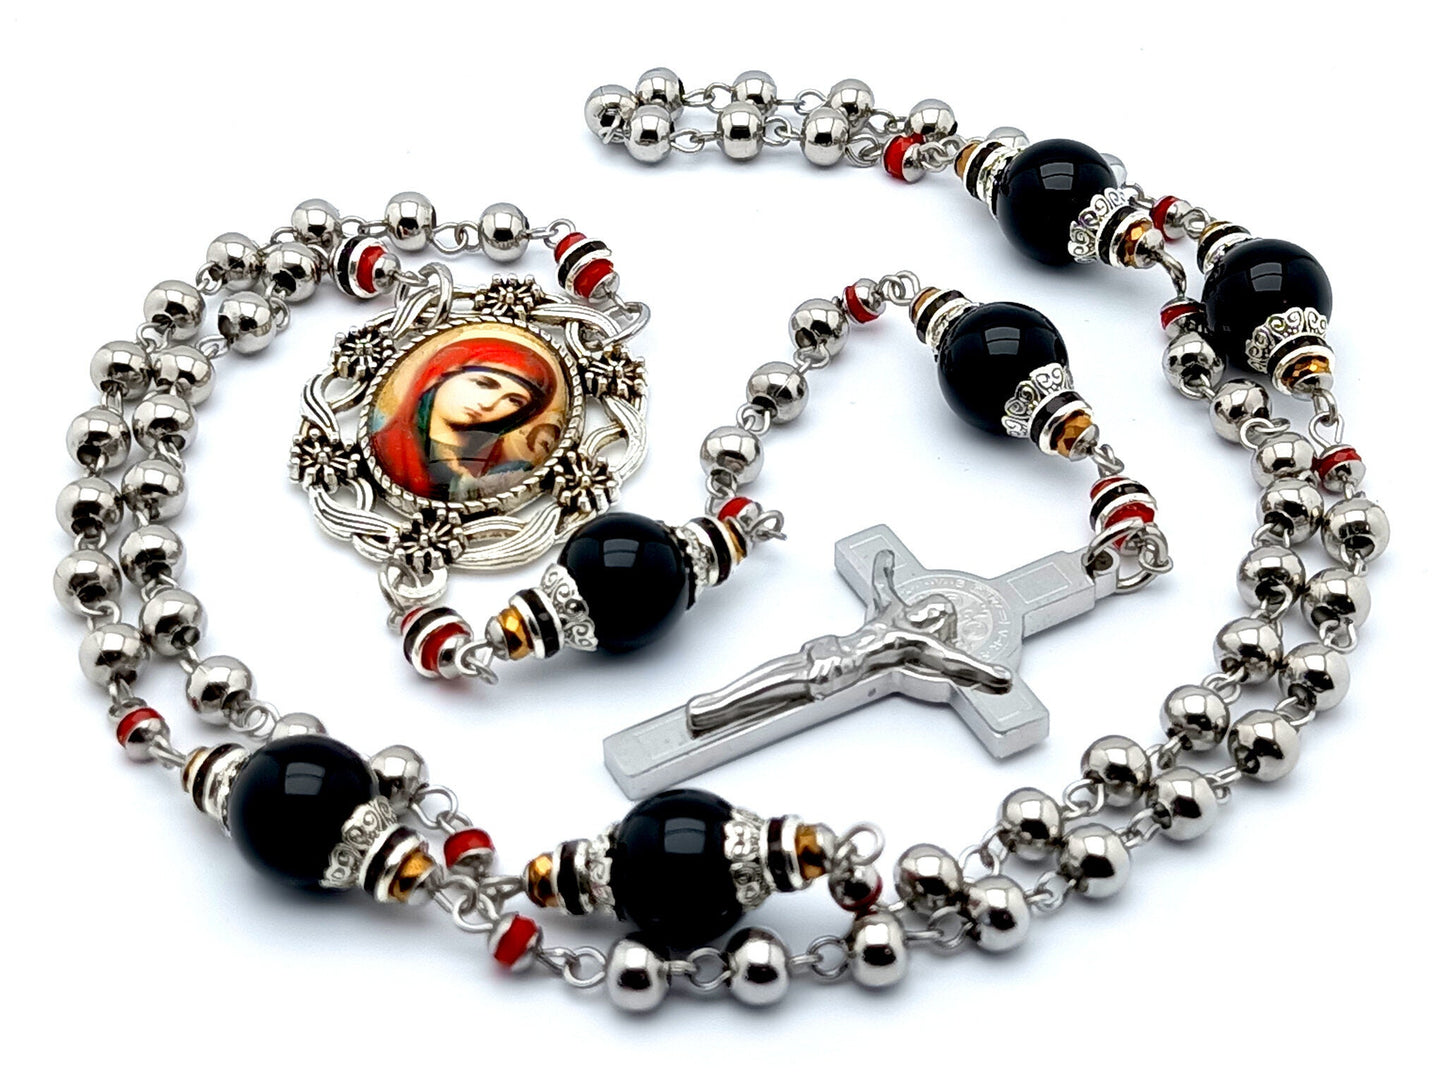 Our Lady of Perpetual Help unique rosary beads with stainless steel and onyx beads, Saint Benedict stainless steel crucifix and picture centre medal.